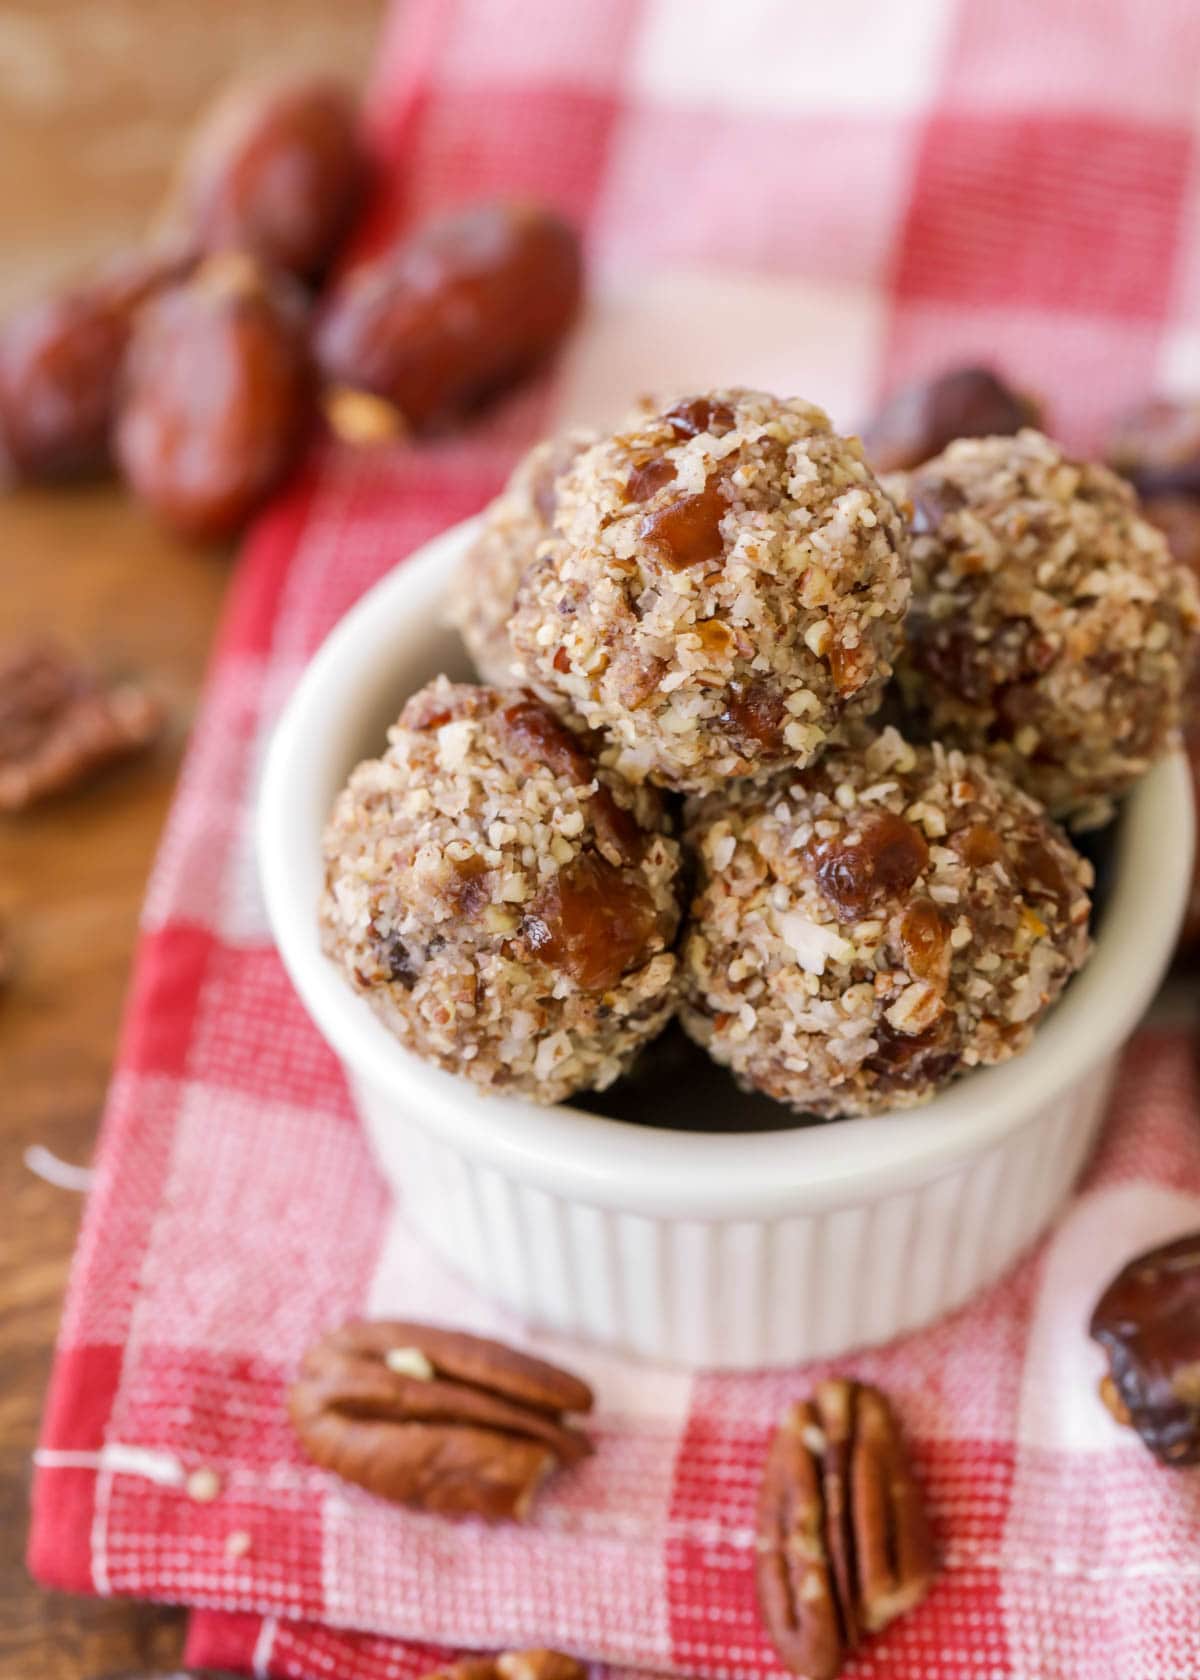 Date balls with coconut and pecans in a small serving dish